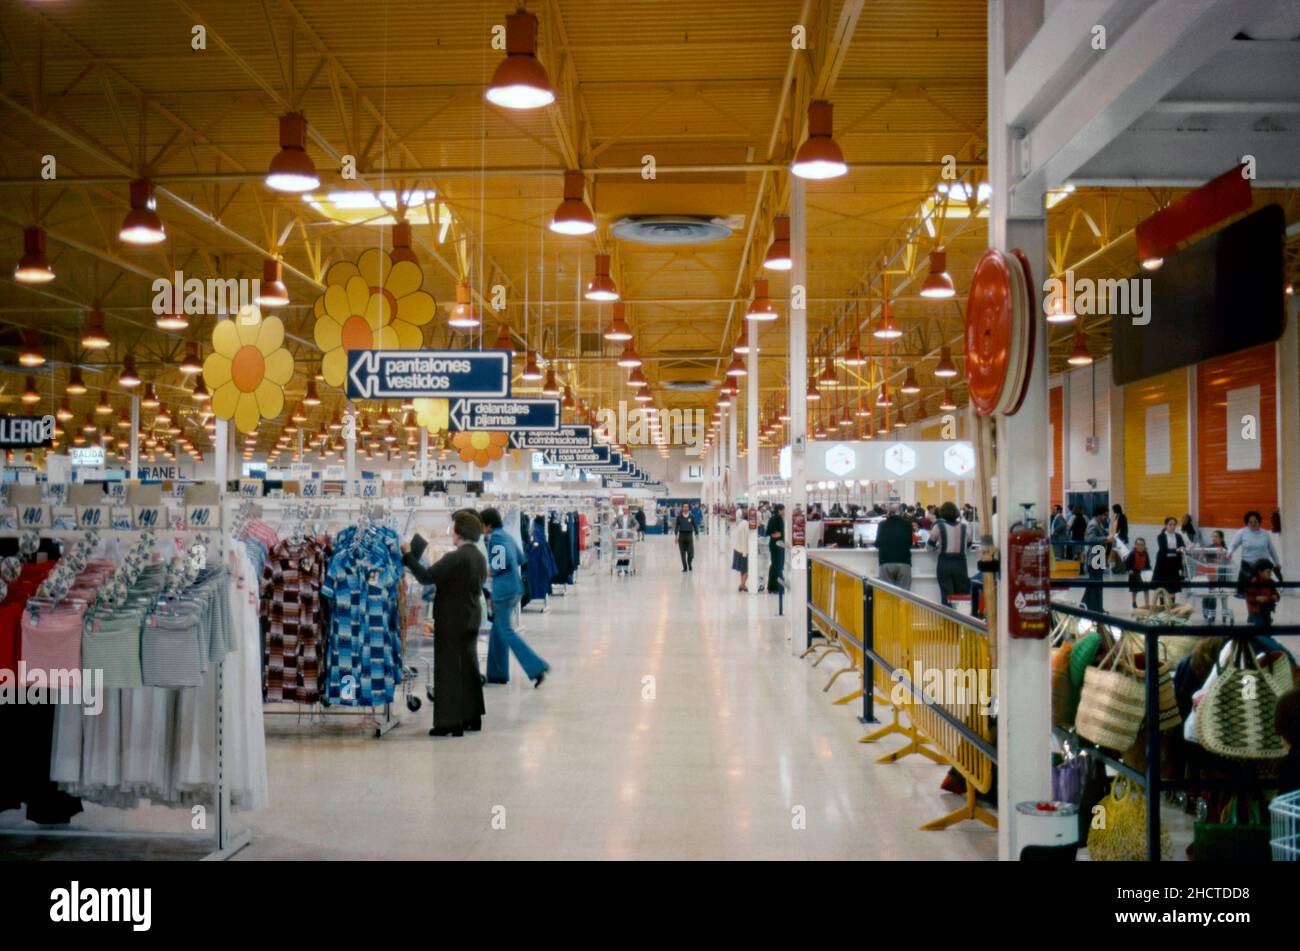 The interior of large Spanish supermarket in 1977. The vast warehouse area includes clothing, seen here left. Giant cut-out yellow flowers hang from the ceiling and the store’s colour palette emphasises bright yellow, red and orange – primary colours that were popular at that time. This image is from an amateur 35mm colour transparency in poor lighting conditions – a vintage 1970s photograph. Stock Photo